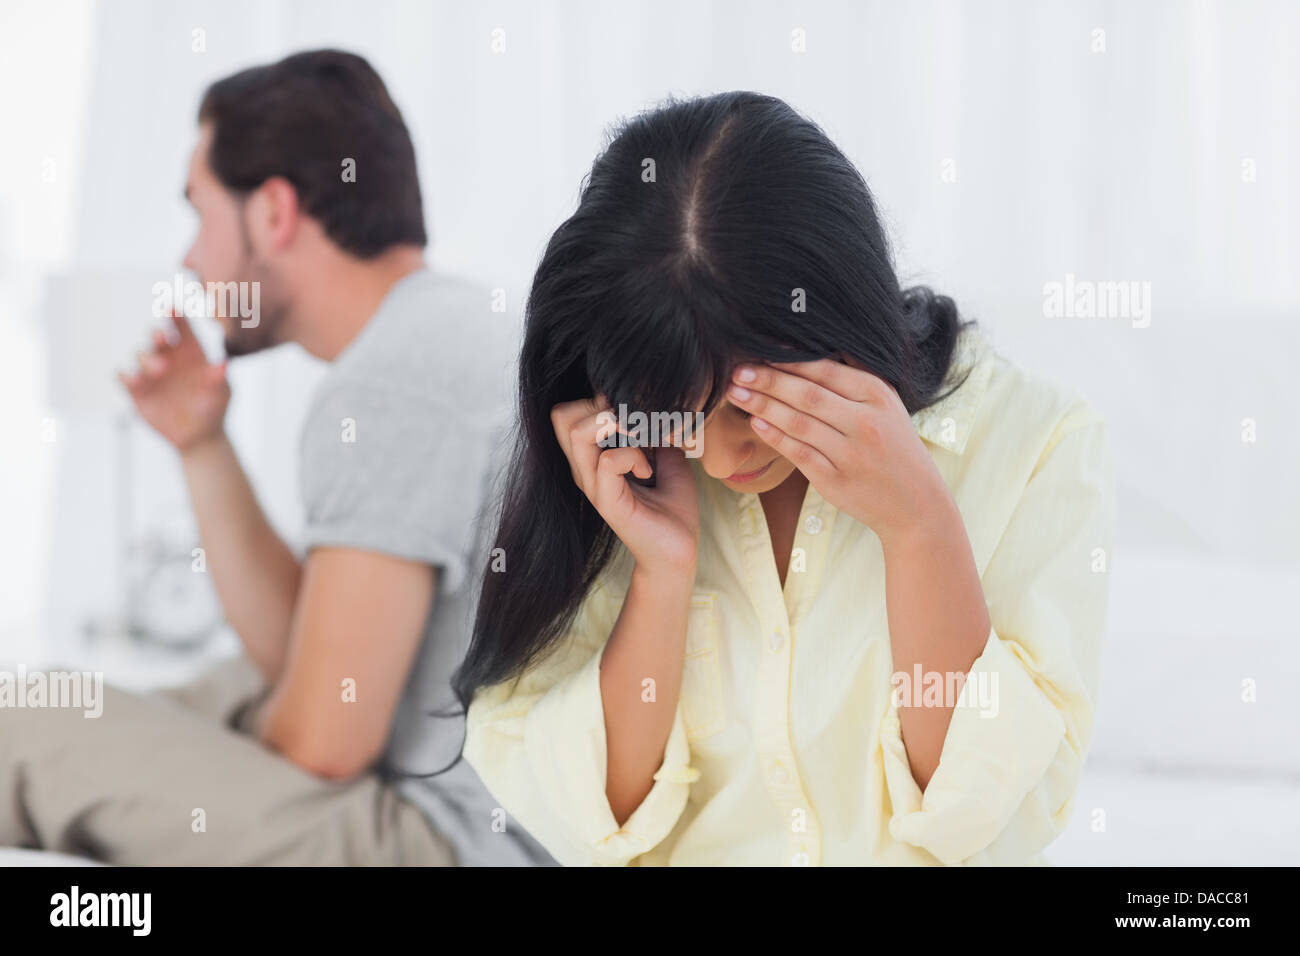 Woman calling and crying during dispute Stock Photo